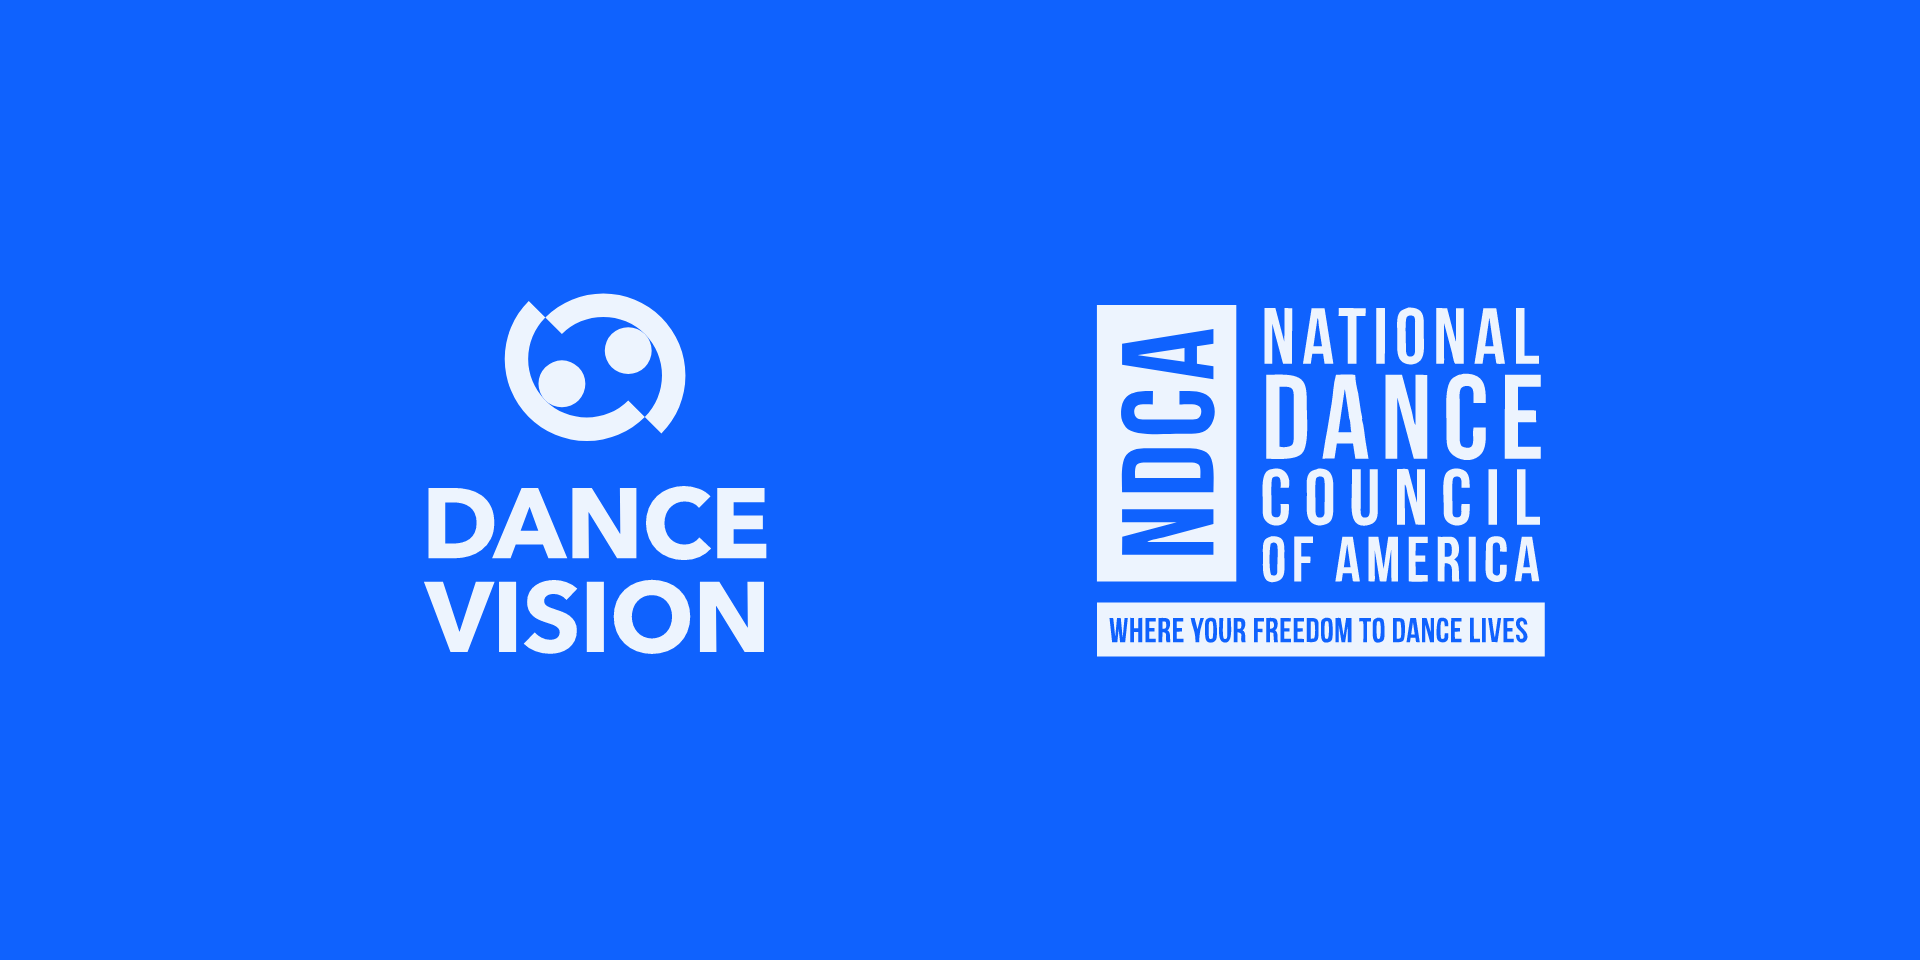 Dance Vision A Full Member of the National Dance Council of America